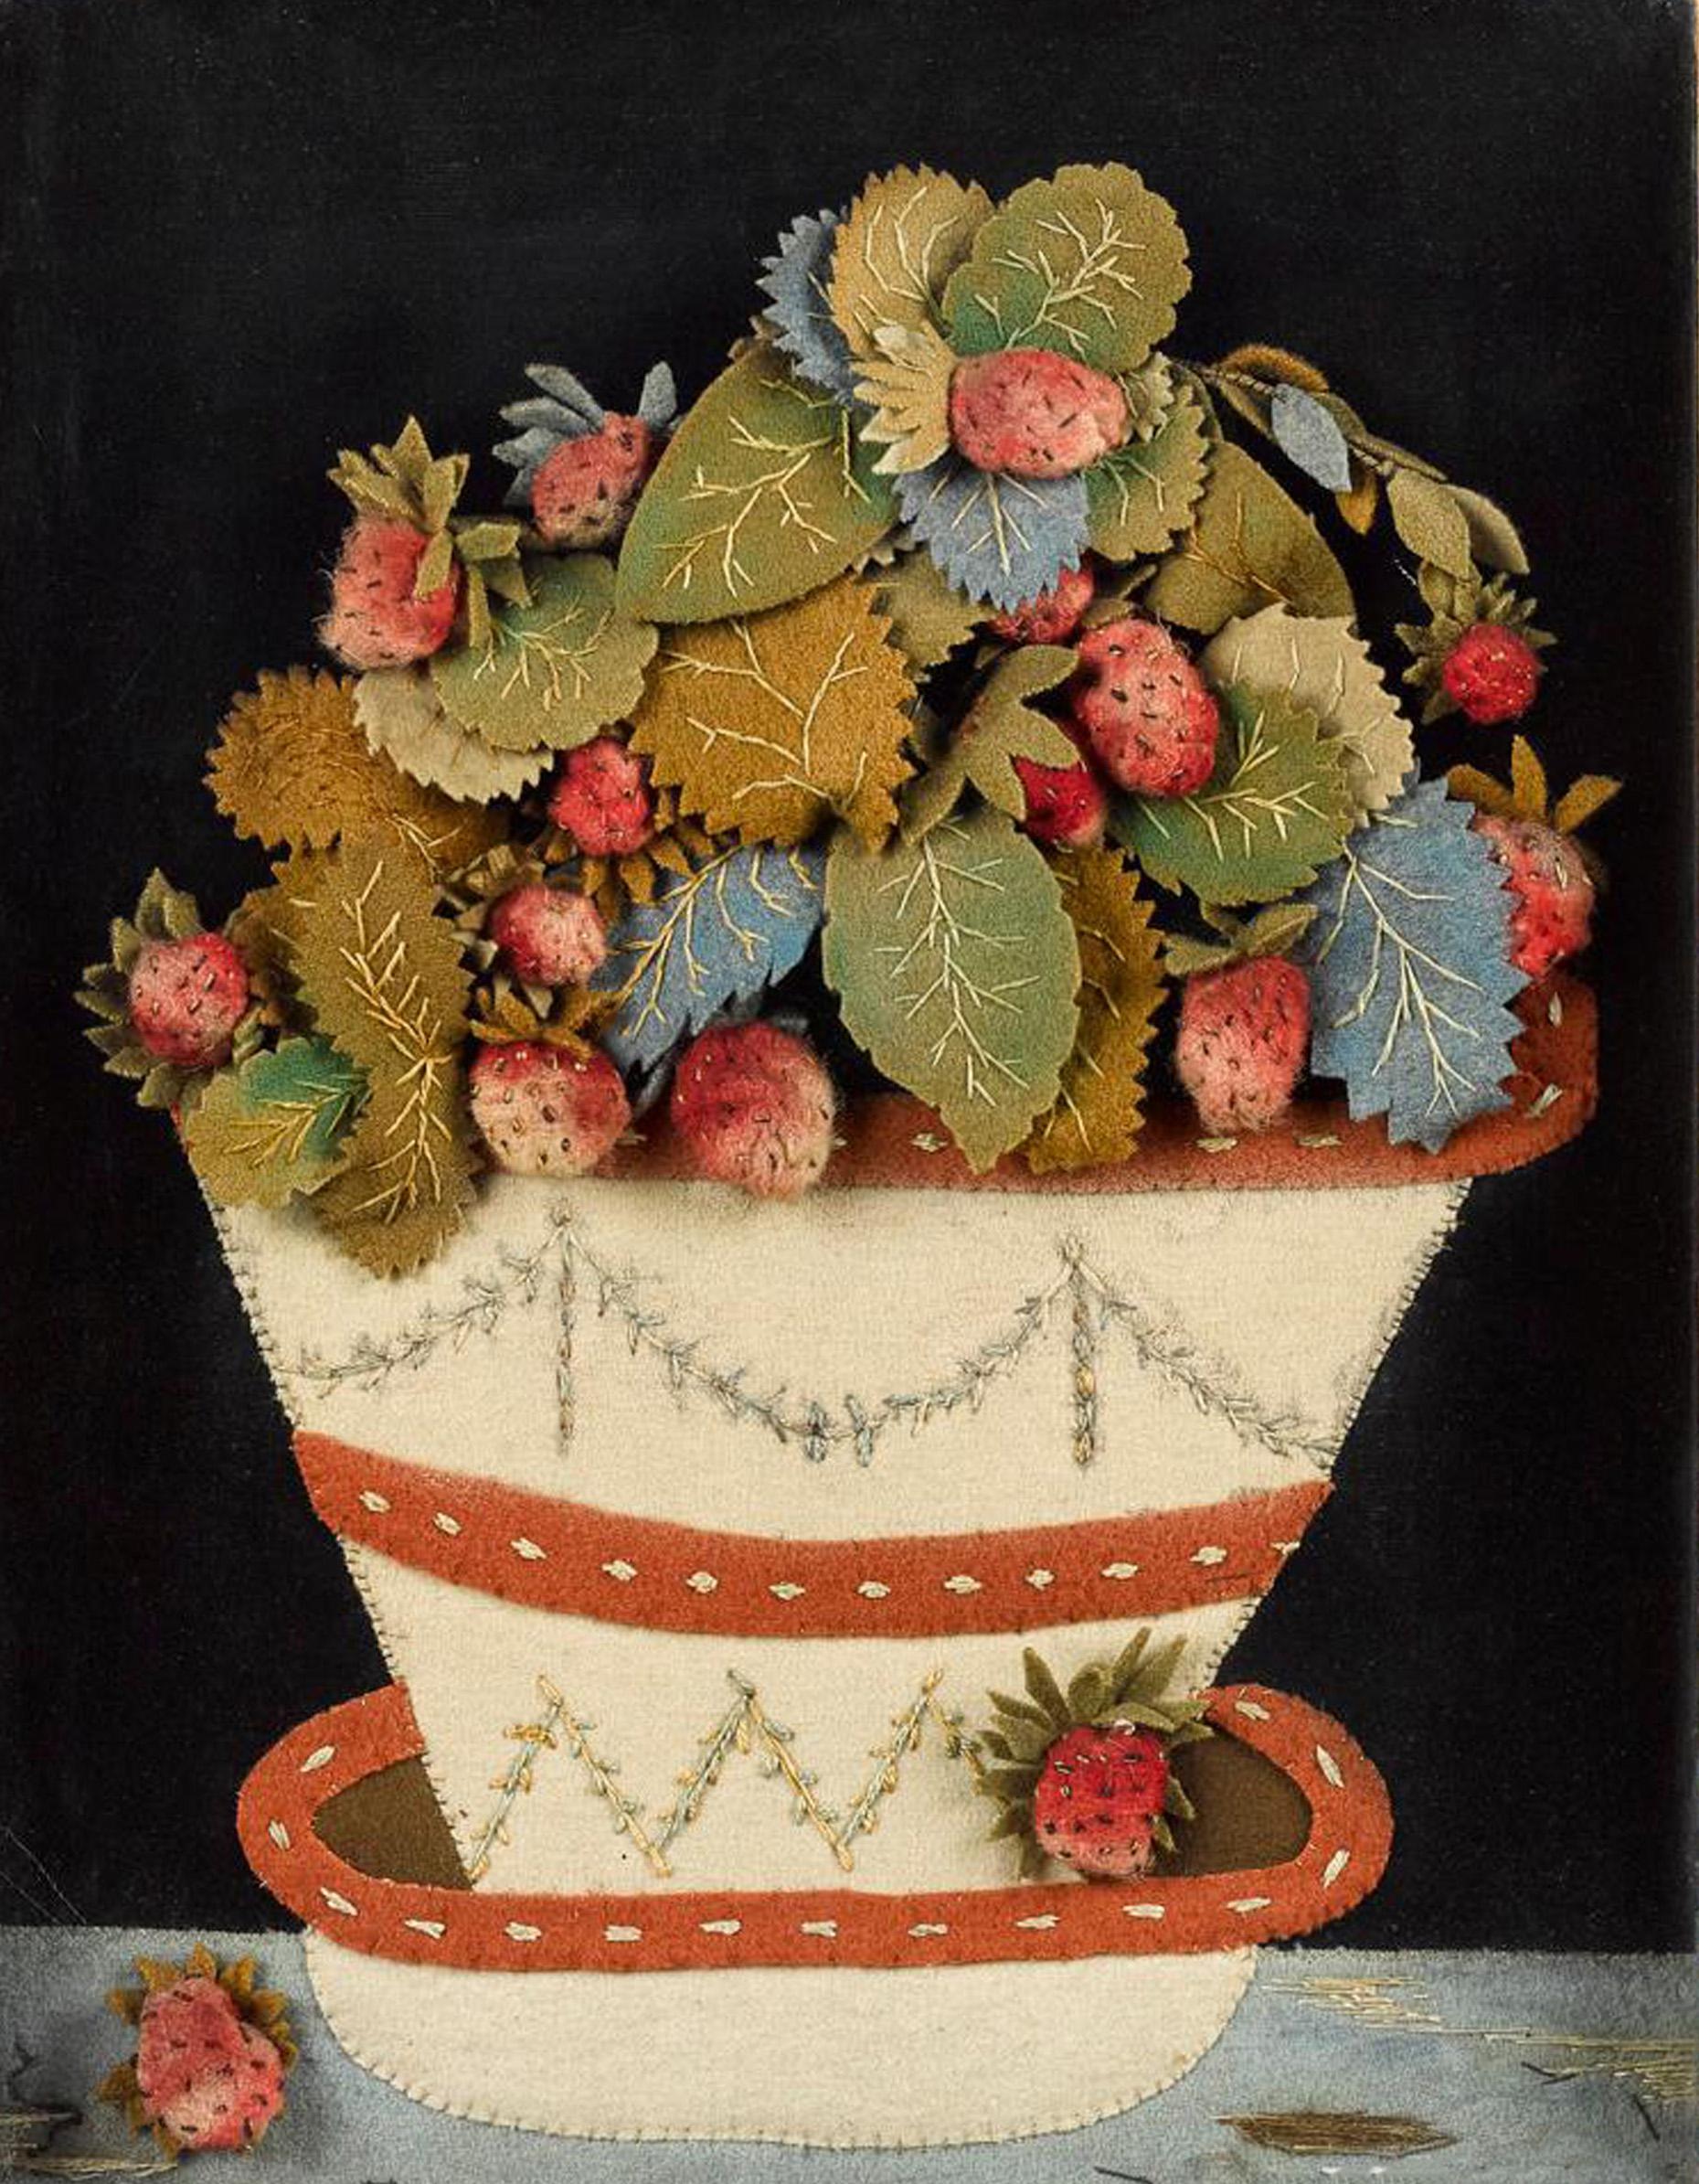 Antique Feltwork picture of a strawberry plant in a pot,
Possibly American,
circa 1860
(NY9570-cknp)

A charming feltwork picture of a strawberry plant in a decorated pottery cache pot and stand placed on a tablecloth. A ripe strawberry sits on